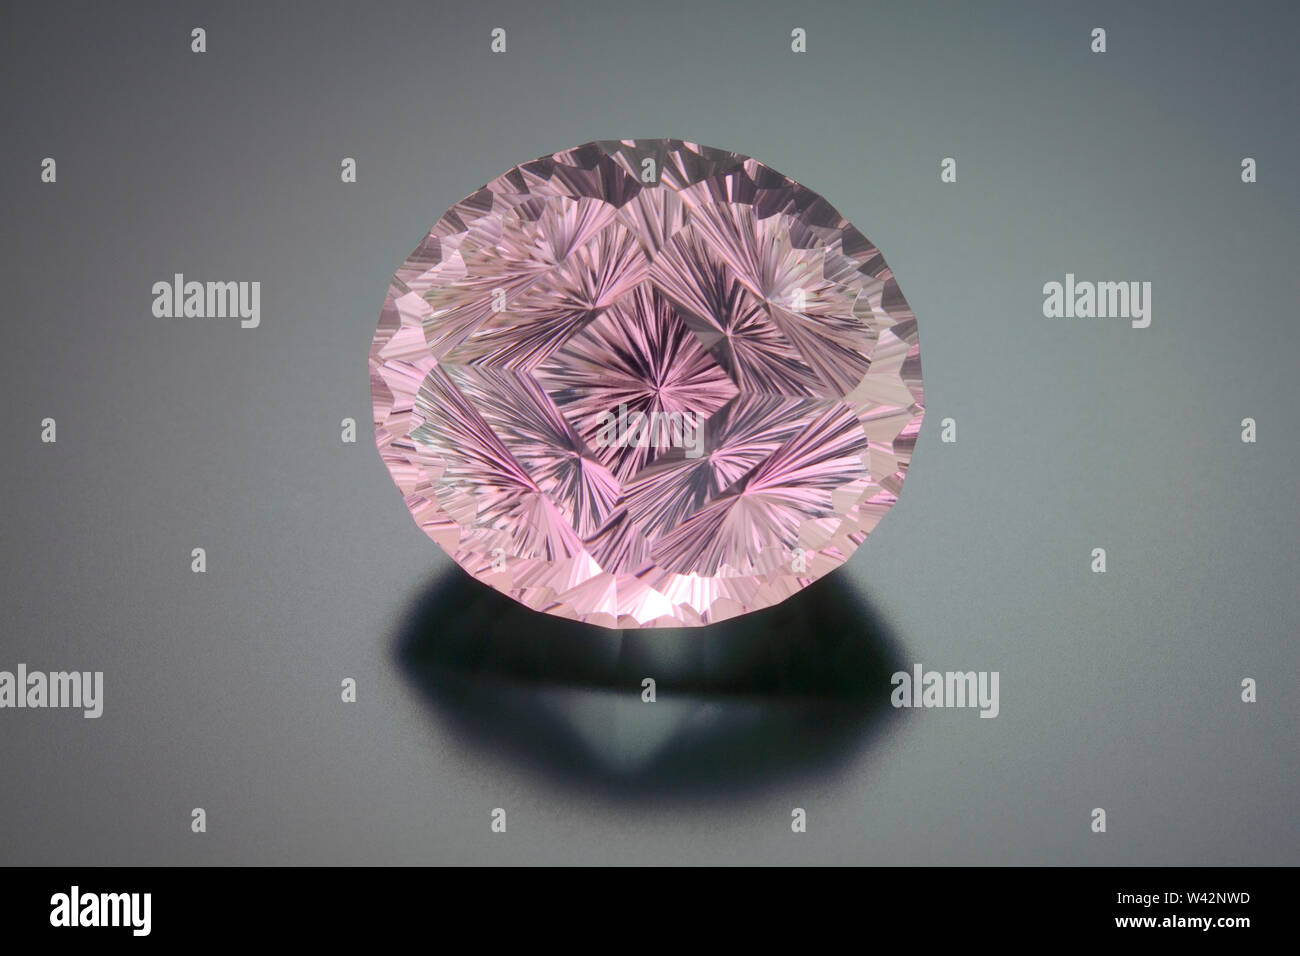 This large rose colored tourmaline fantasy cut gemstone site on a grey reflective background. Stock Photo